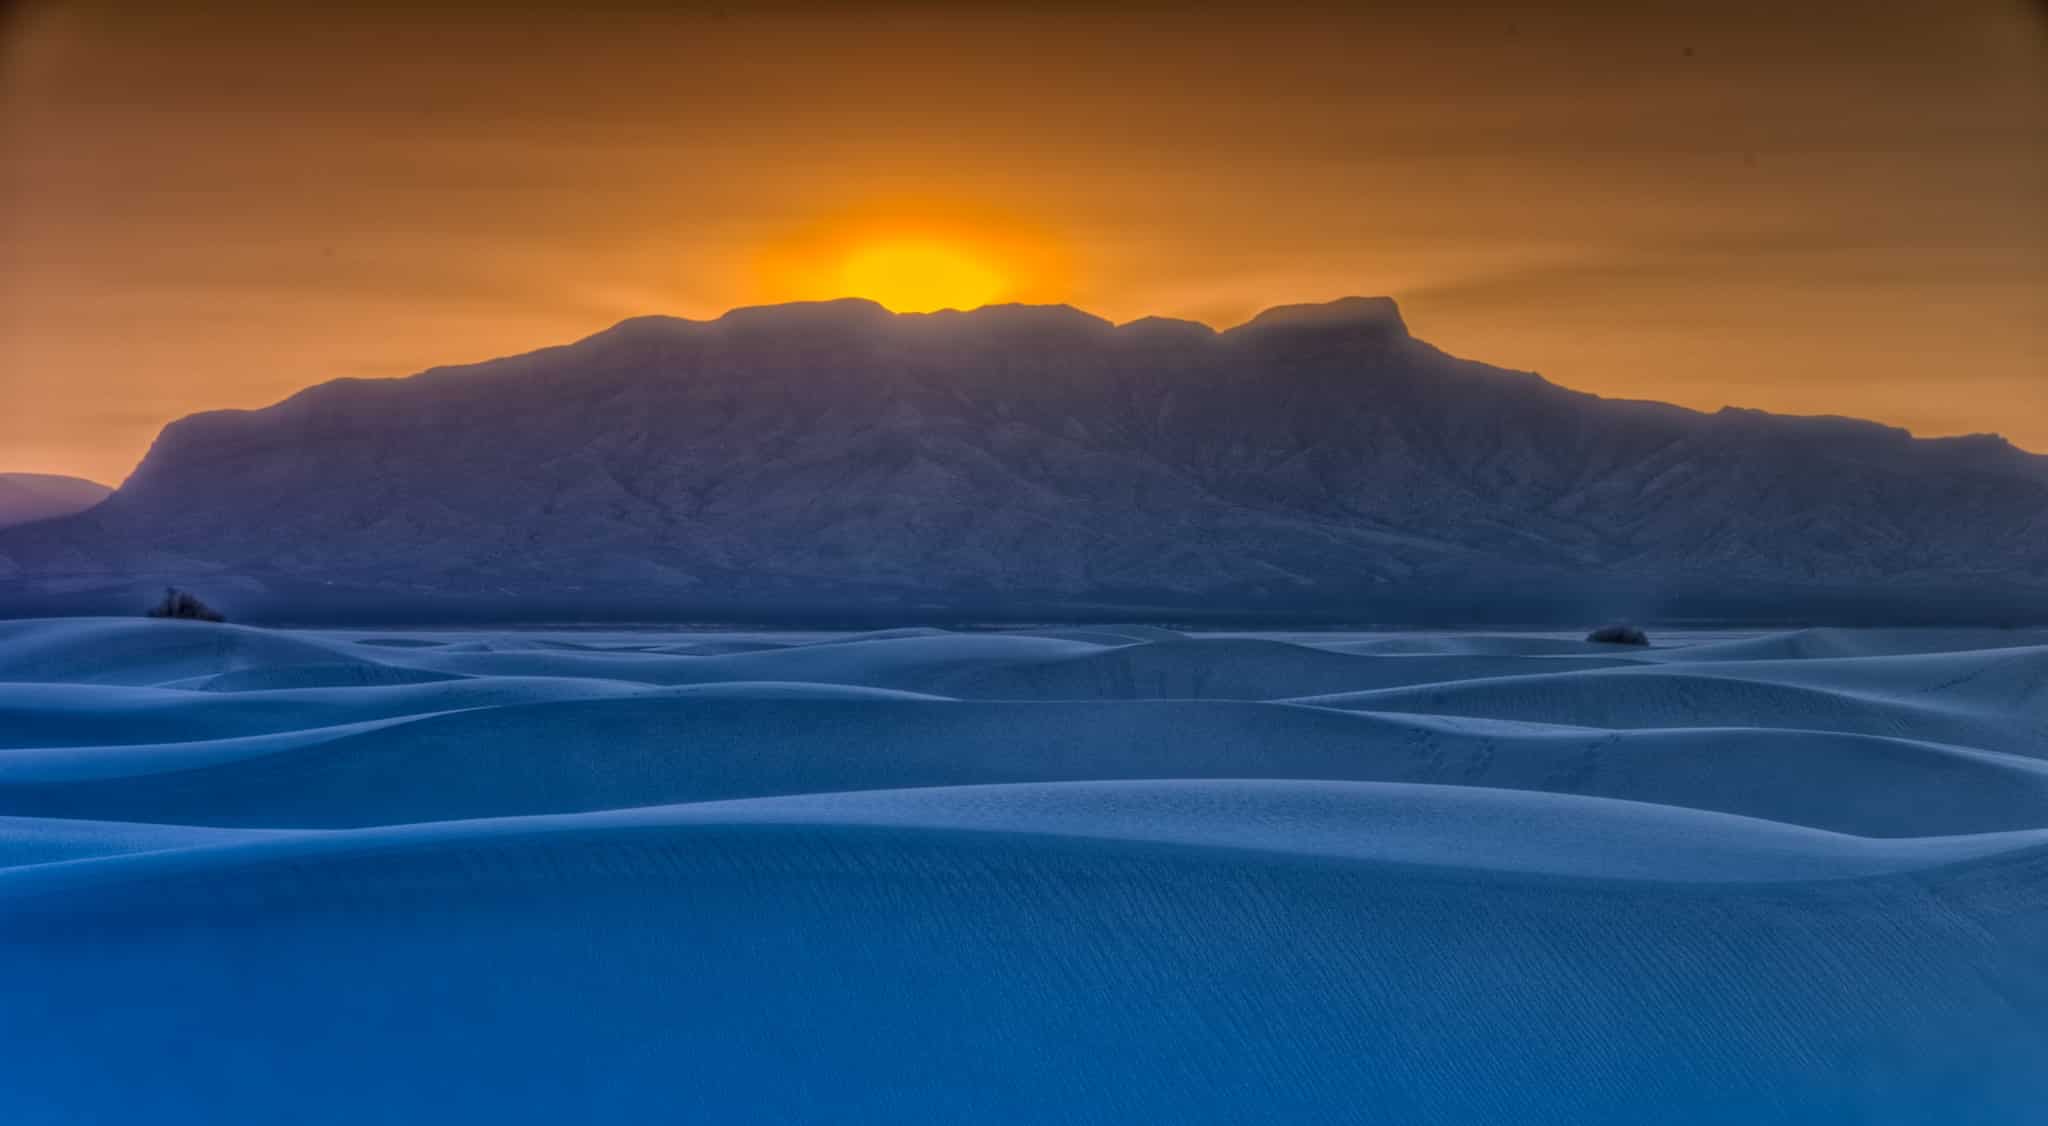 Looking west over White Sands National Monument toward the San Andres Mountains at sunset.